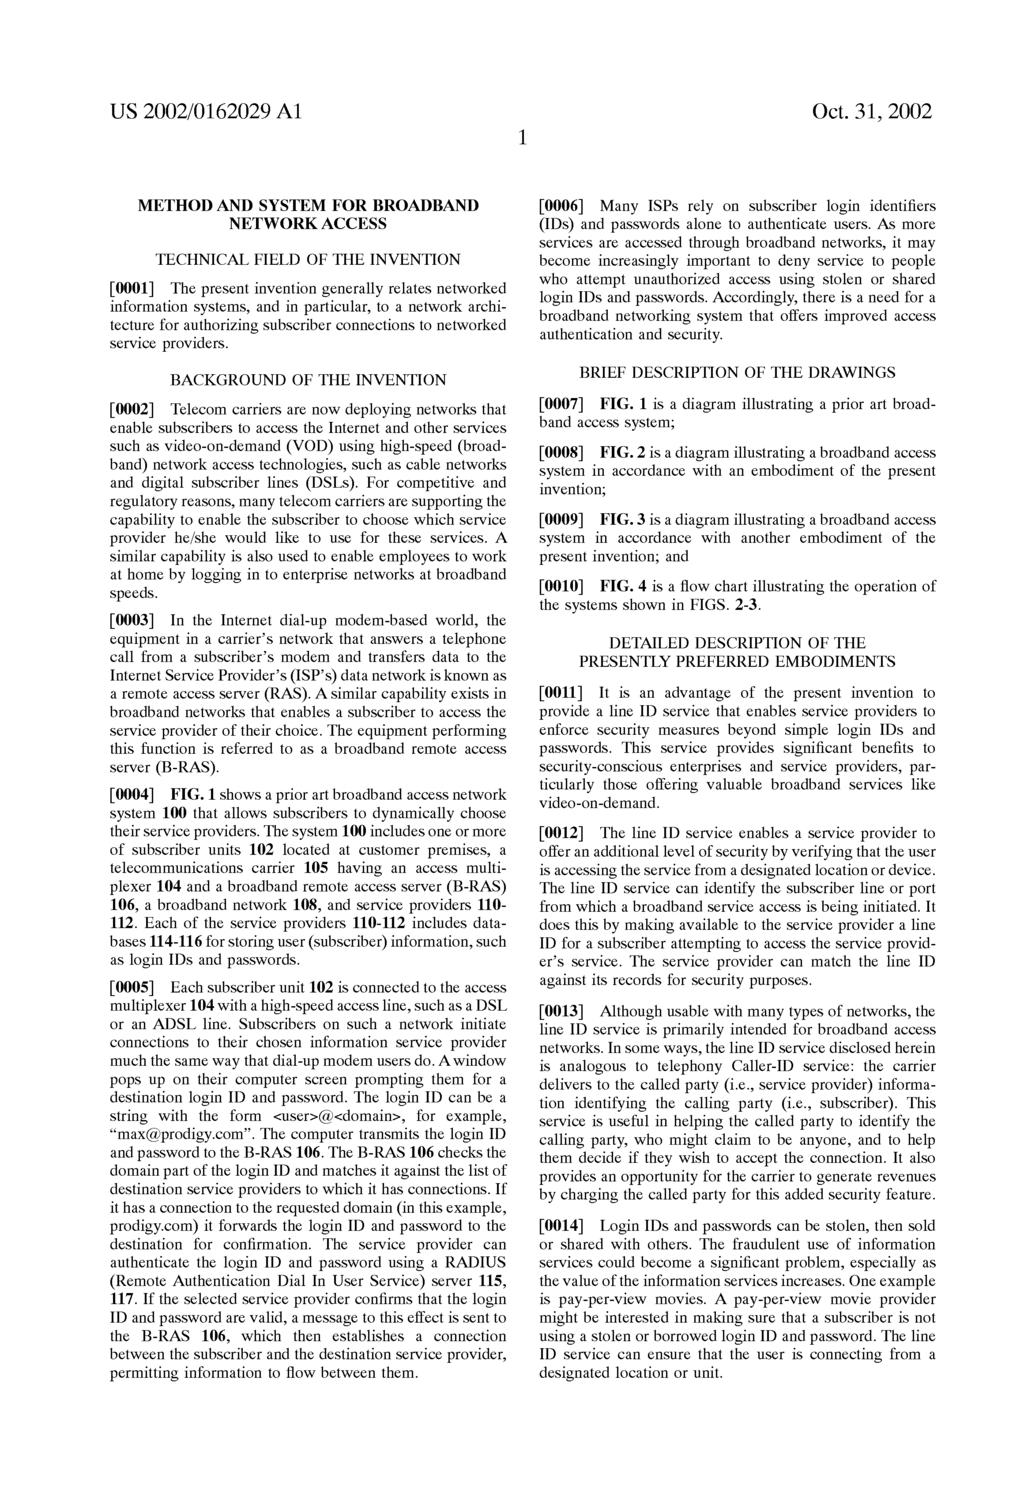 US 2002/0162029 A1 Oct. 31, 2002 METHOD AND SYSTEM FOR BROADBAND NETWORKACCESS TECHNICAL FIELD OF THE INVENTION 0001.